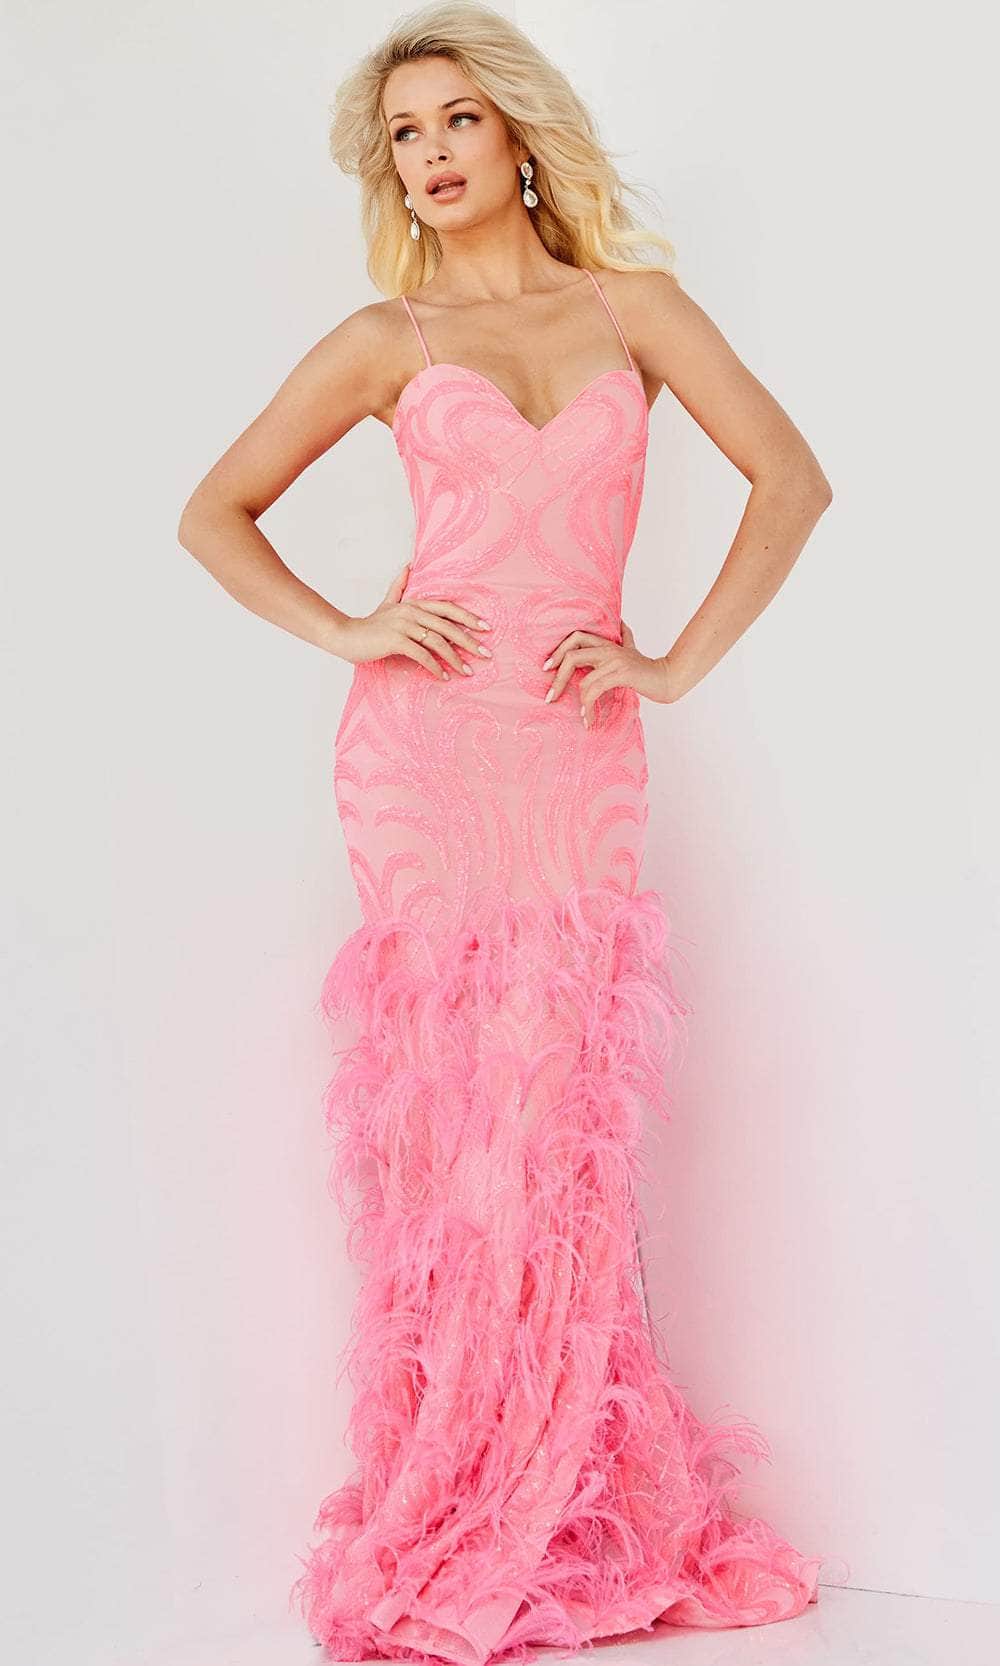 Image of Jovani 07425 - Sweetheart Sequin Feathered Prom Dress